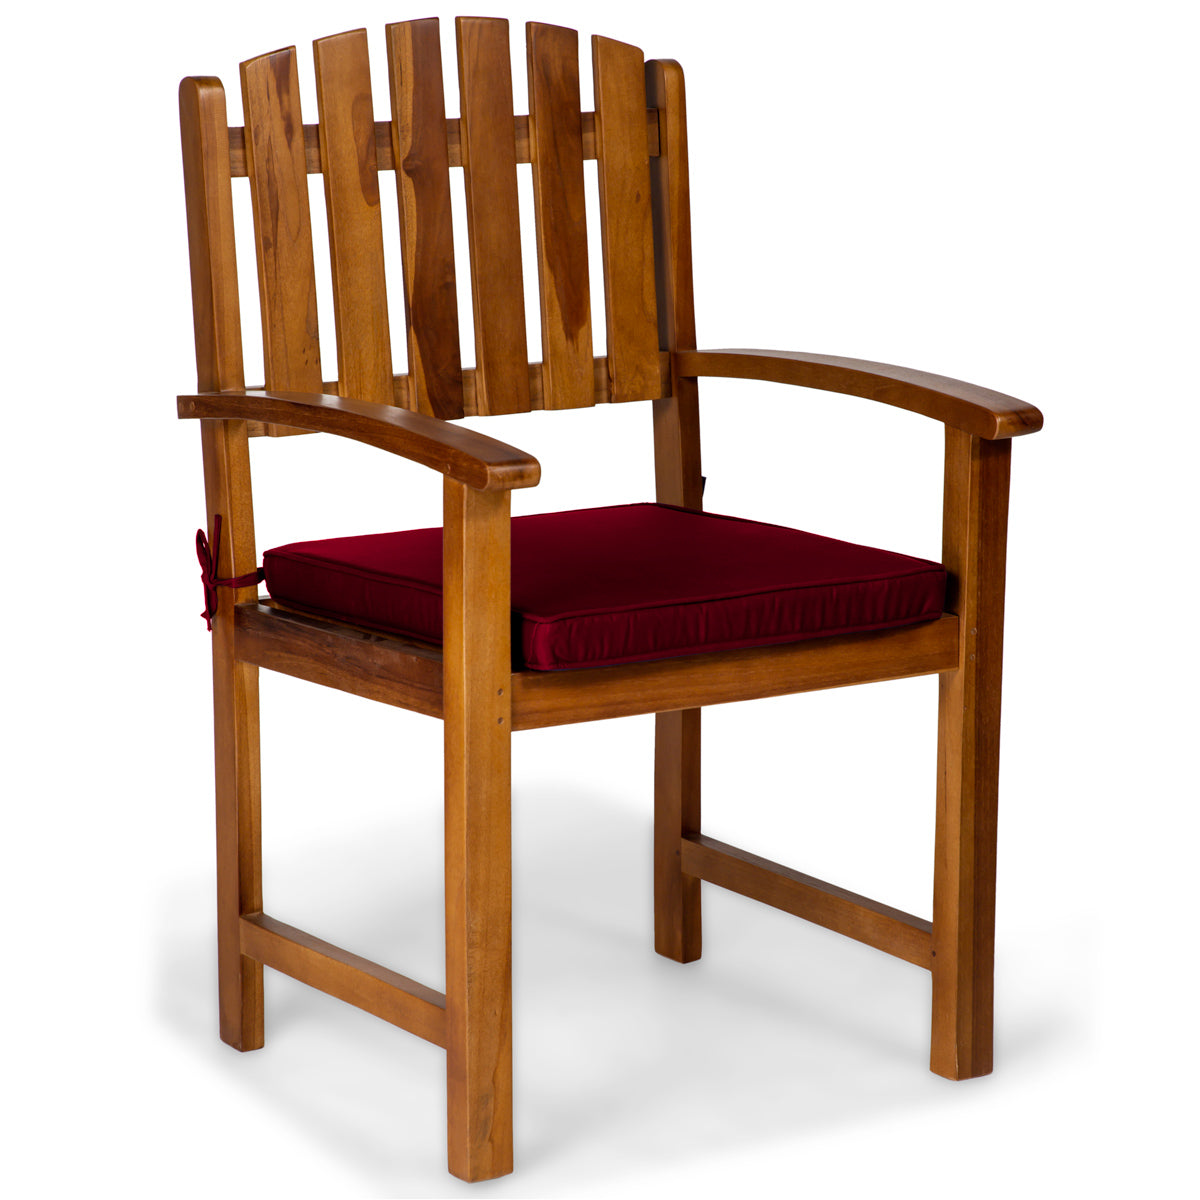 Teak Dining Chair with Red Cushion